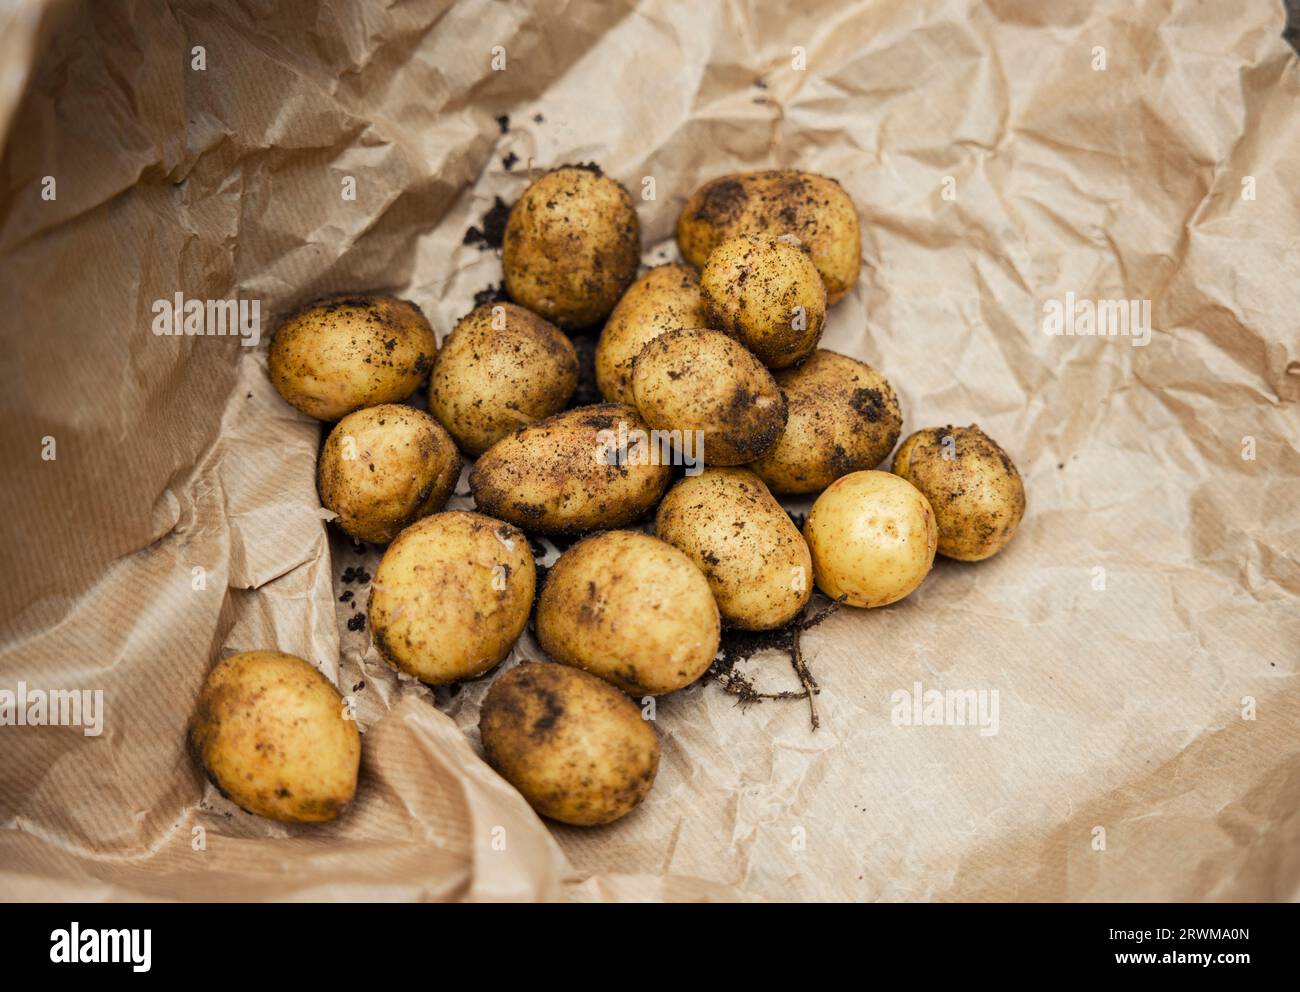 This image showcases a collection of freshly harvested, earthy potatoes resting on brown paper, emphasizing the agricultural essence of rural produce. Stock Photo